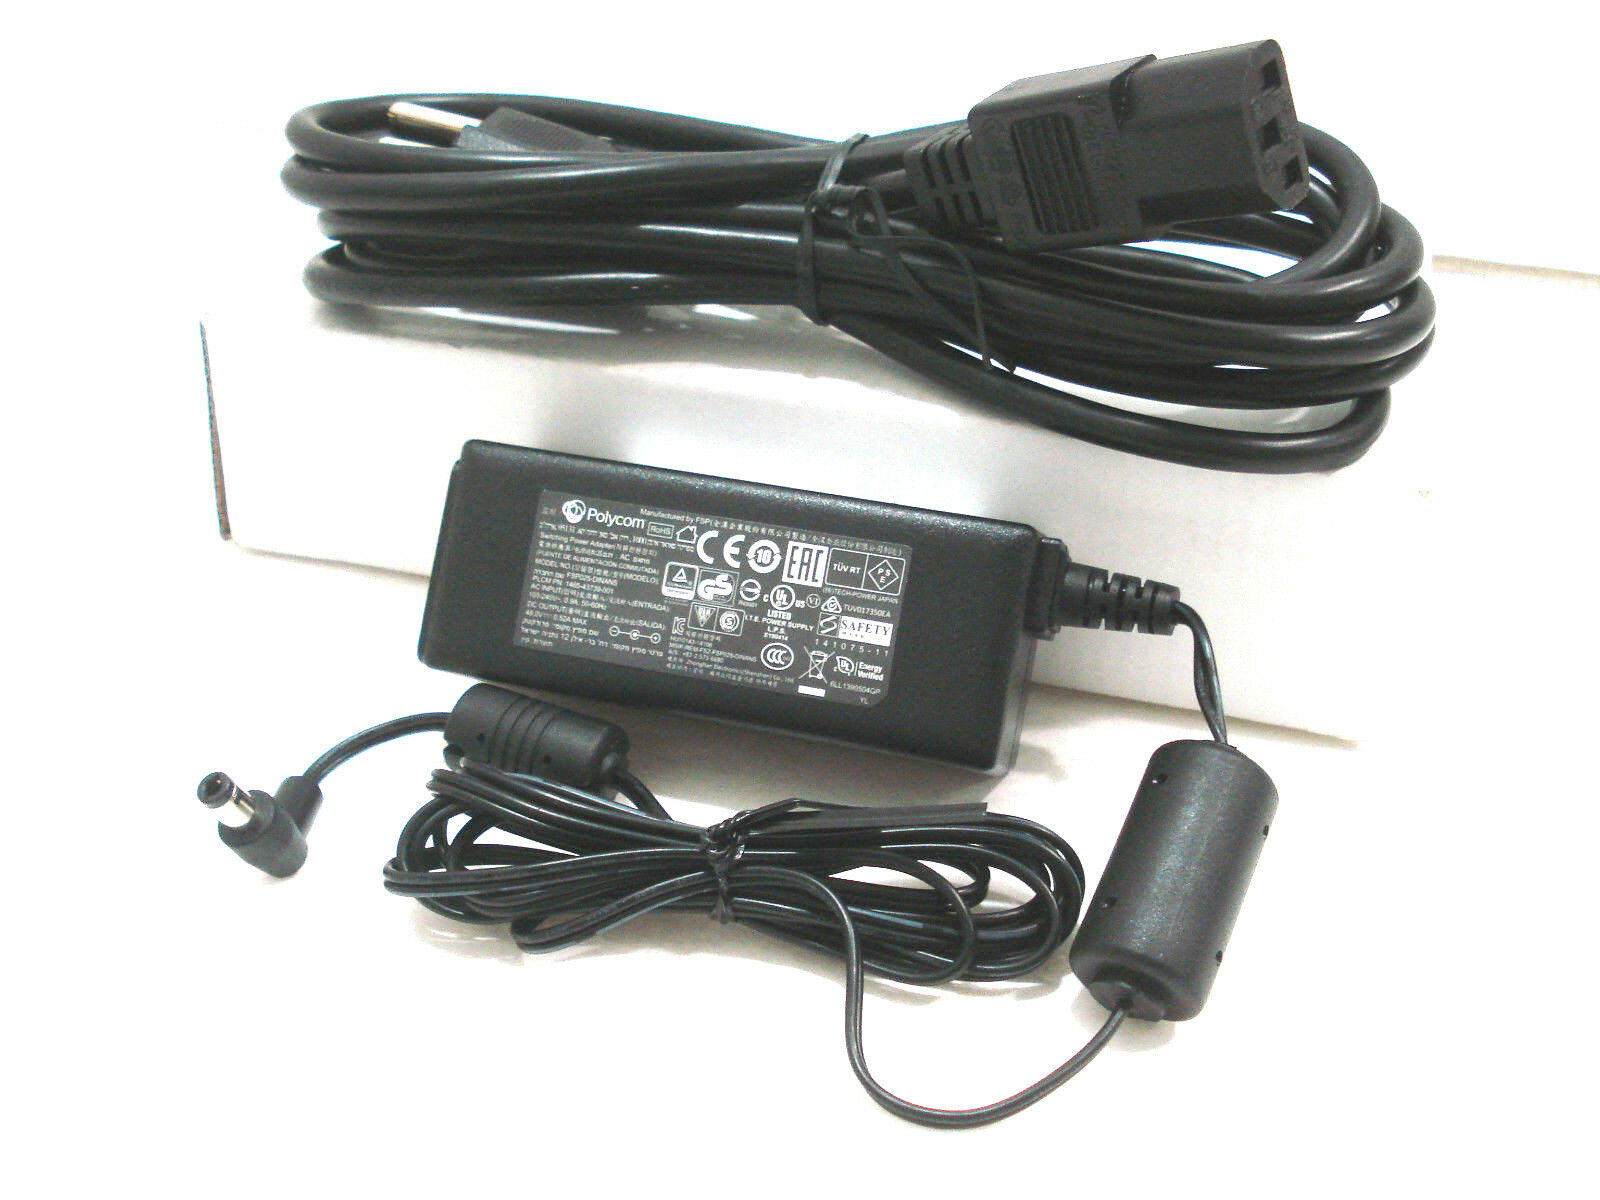 New 48V 0.52A Polycom FSP025-DINANS 1465-43739-001 Switching Power Adapter